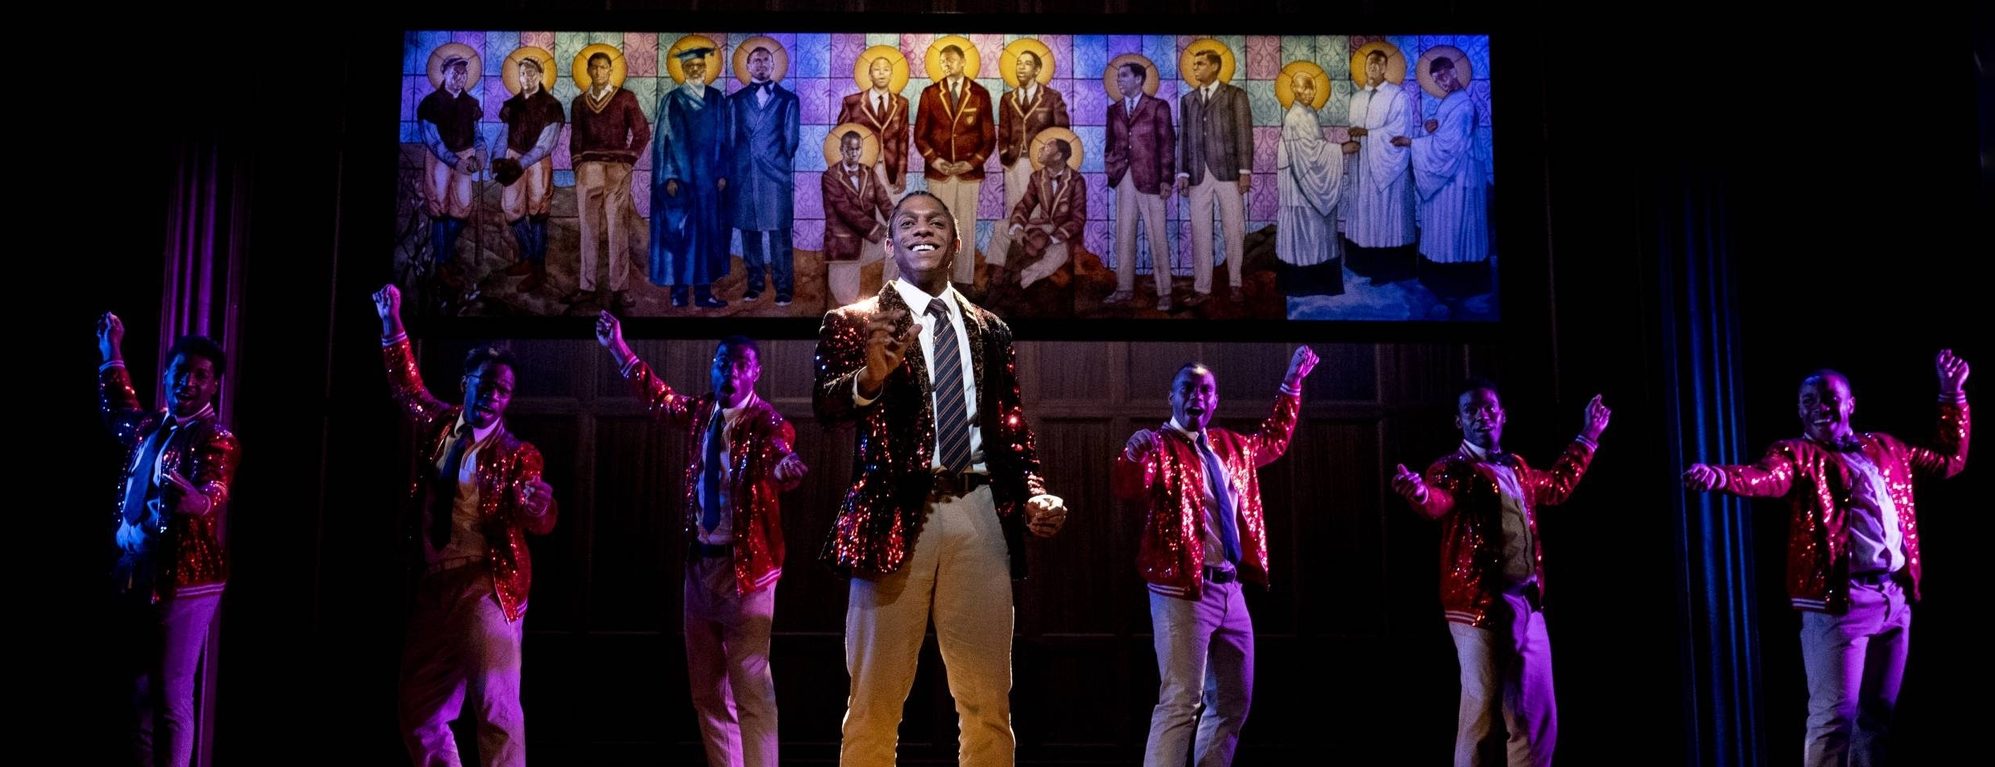 Aaron James McKenzie with members of the cast in a scene from CHOIR BOY by Tarell Alvin McCraney, directed by Christopher D. Betts, Yale Repertory Theatre, March 31-April 23, 2022. Photo © Joan Marcus